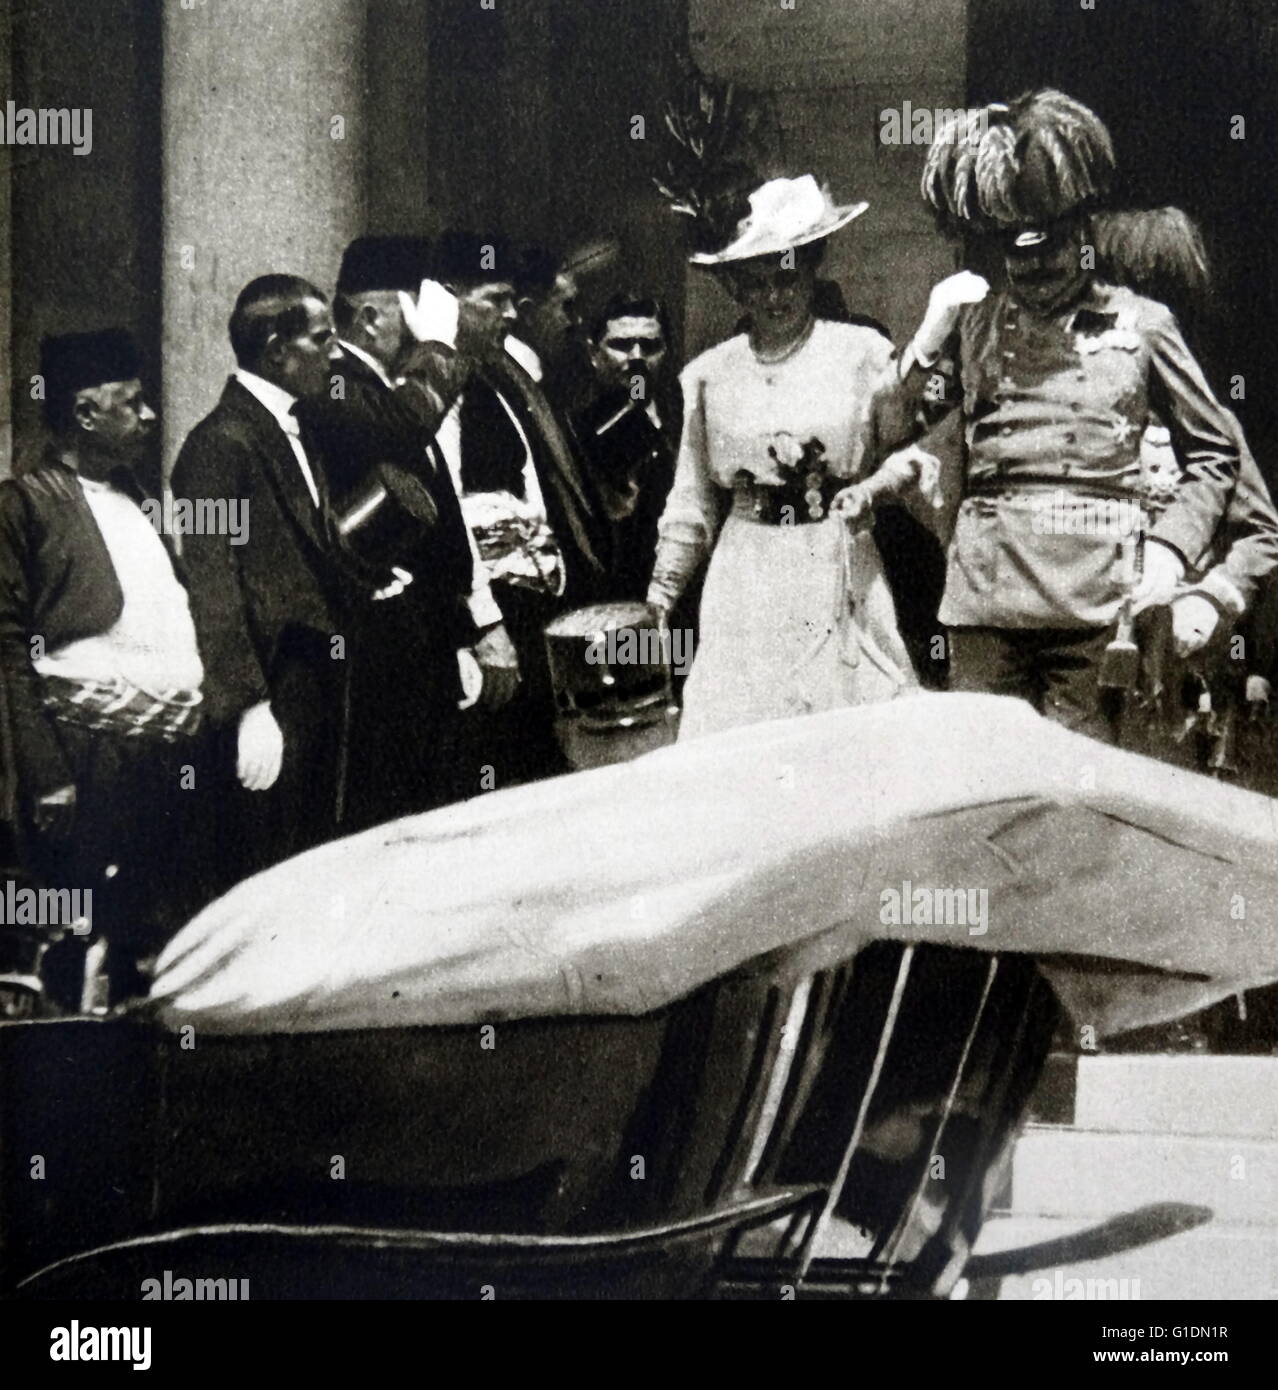 Photograph of Archduke Franz Ferdinand of Austria (1875-1914) and his wife Sophie, Duchess of Hohenberg (1868-1914) leaving the Sarajevo Senate, five minutes before he they shot and killed by Gavrilo Princip (1894-1918) triggering The Great War. Dated 1914 Stock Photo